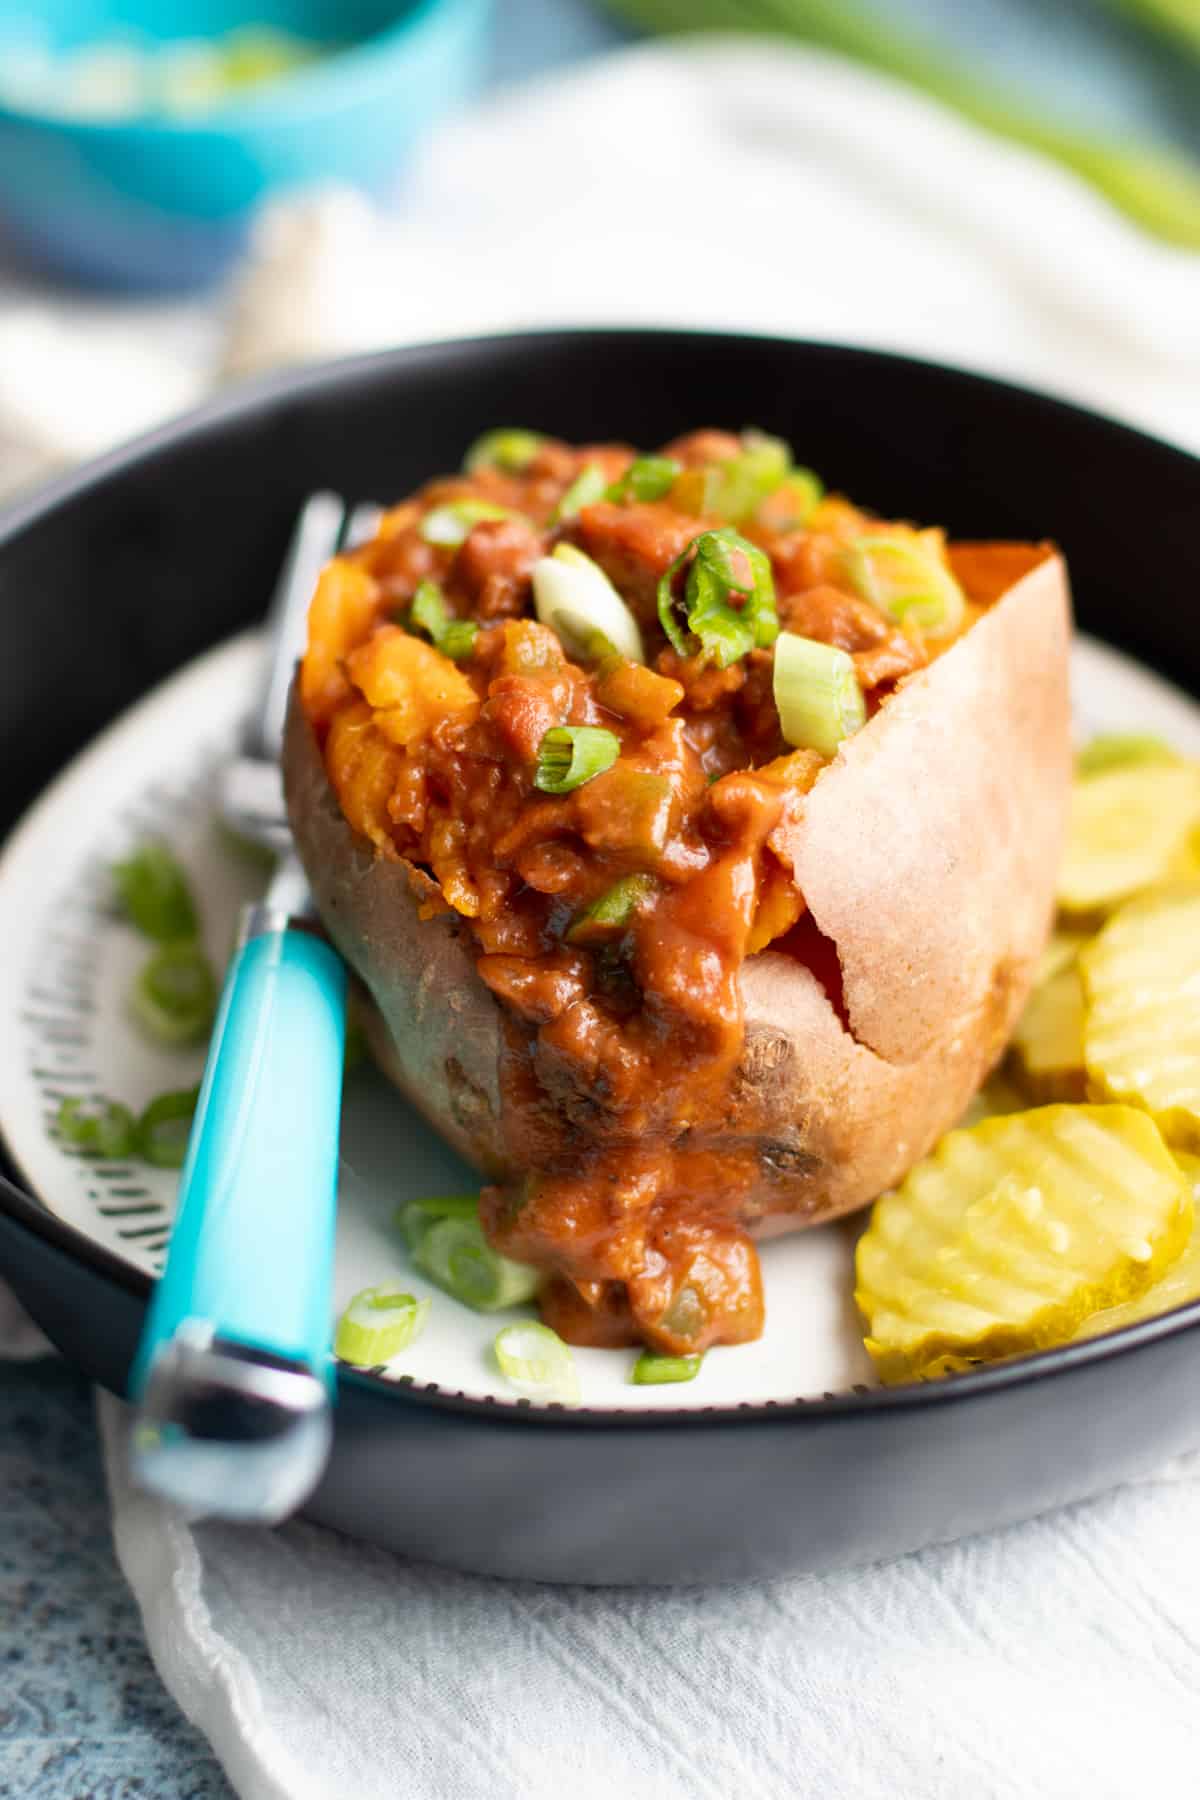 Sweet potato stuffed with Sloppy Joes filling on a plate, with a teal-handled fork and pickle slices next to the potato.